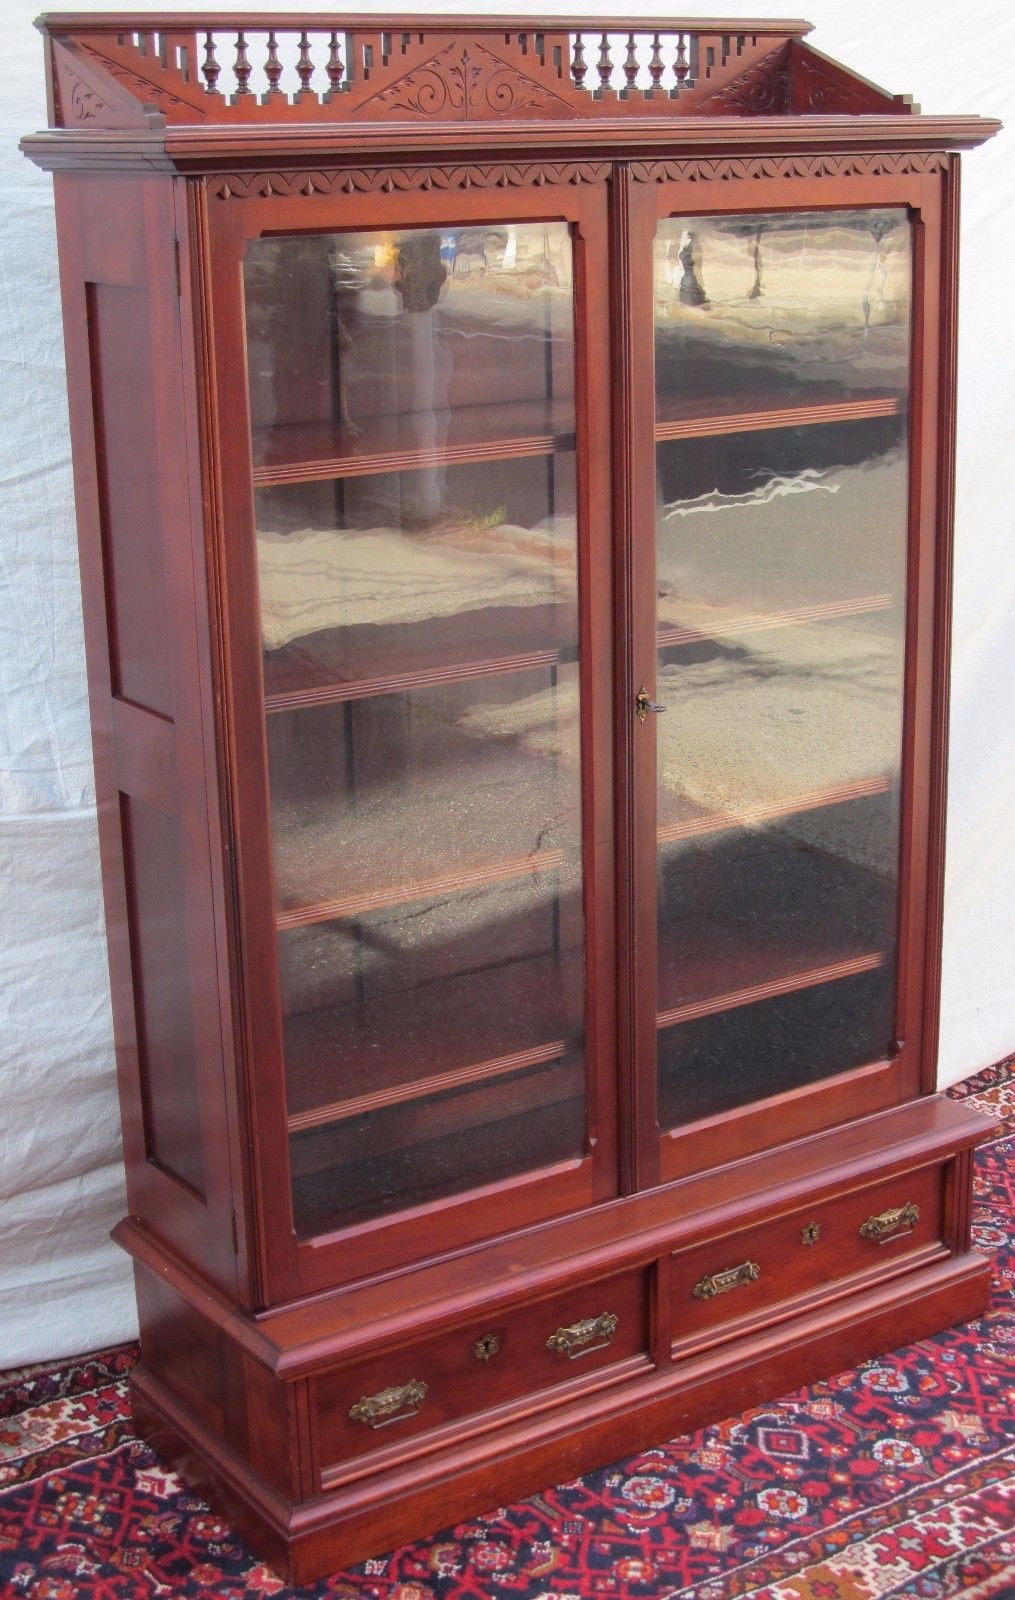 EASTLAKE VICTORIAN CHERRY BOOKCASE WITH NICELY DEFINED STICK & BALL GALLERY